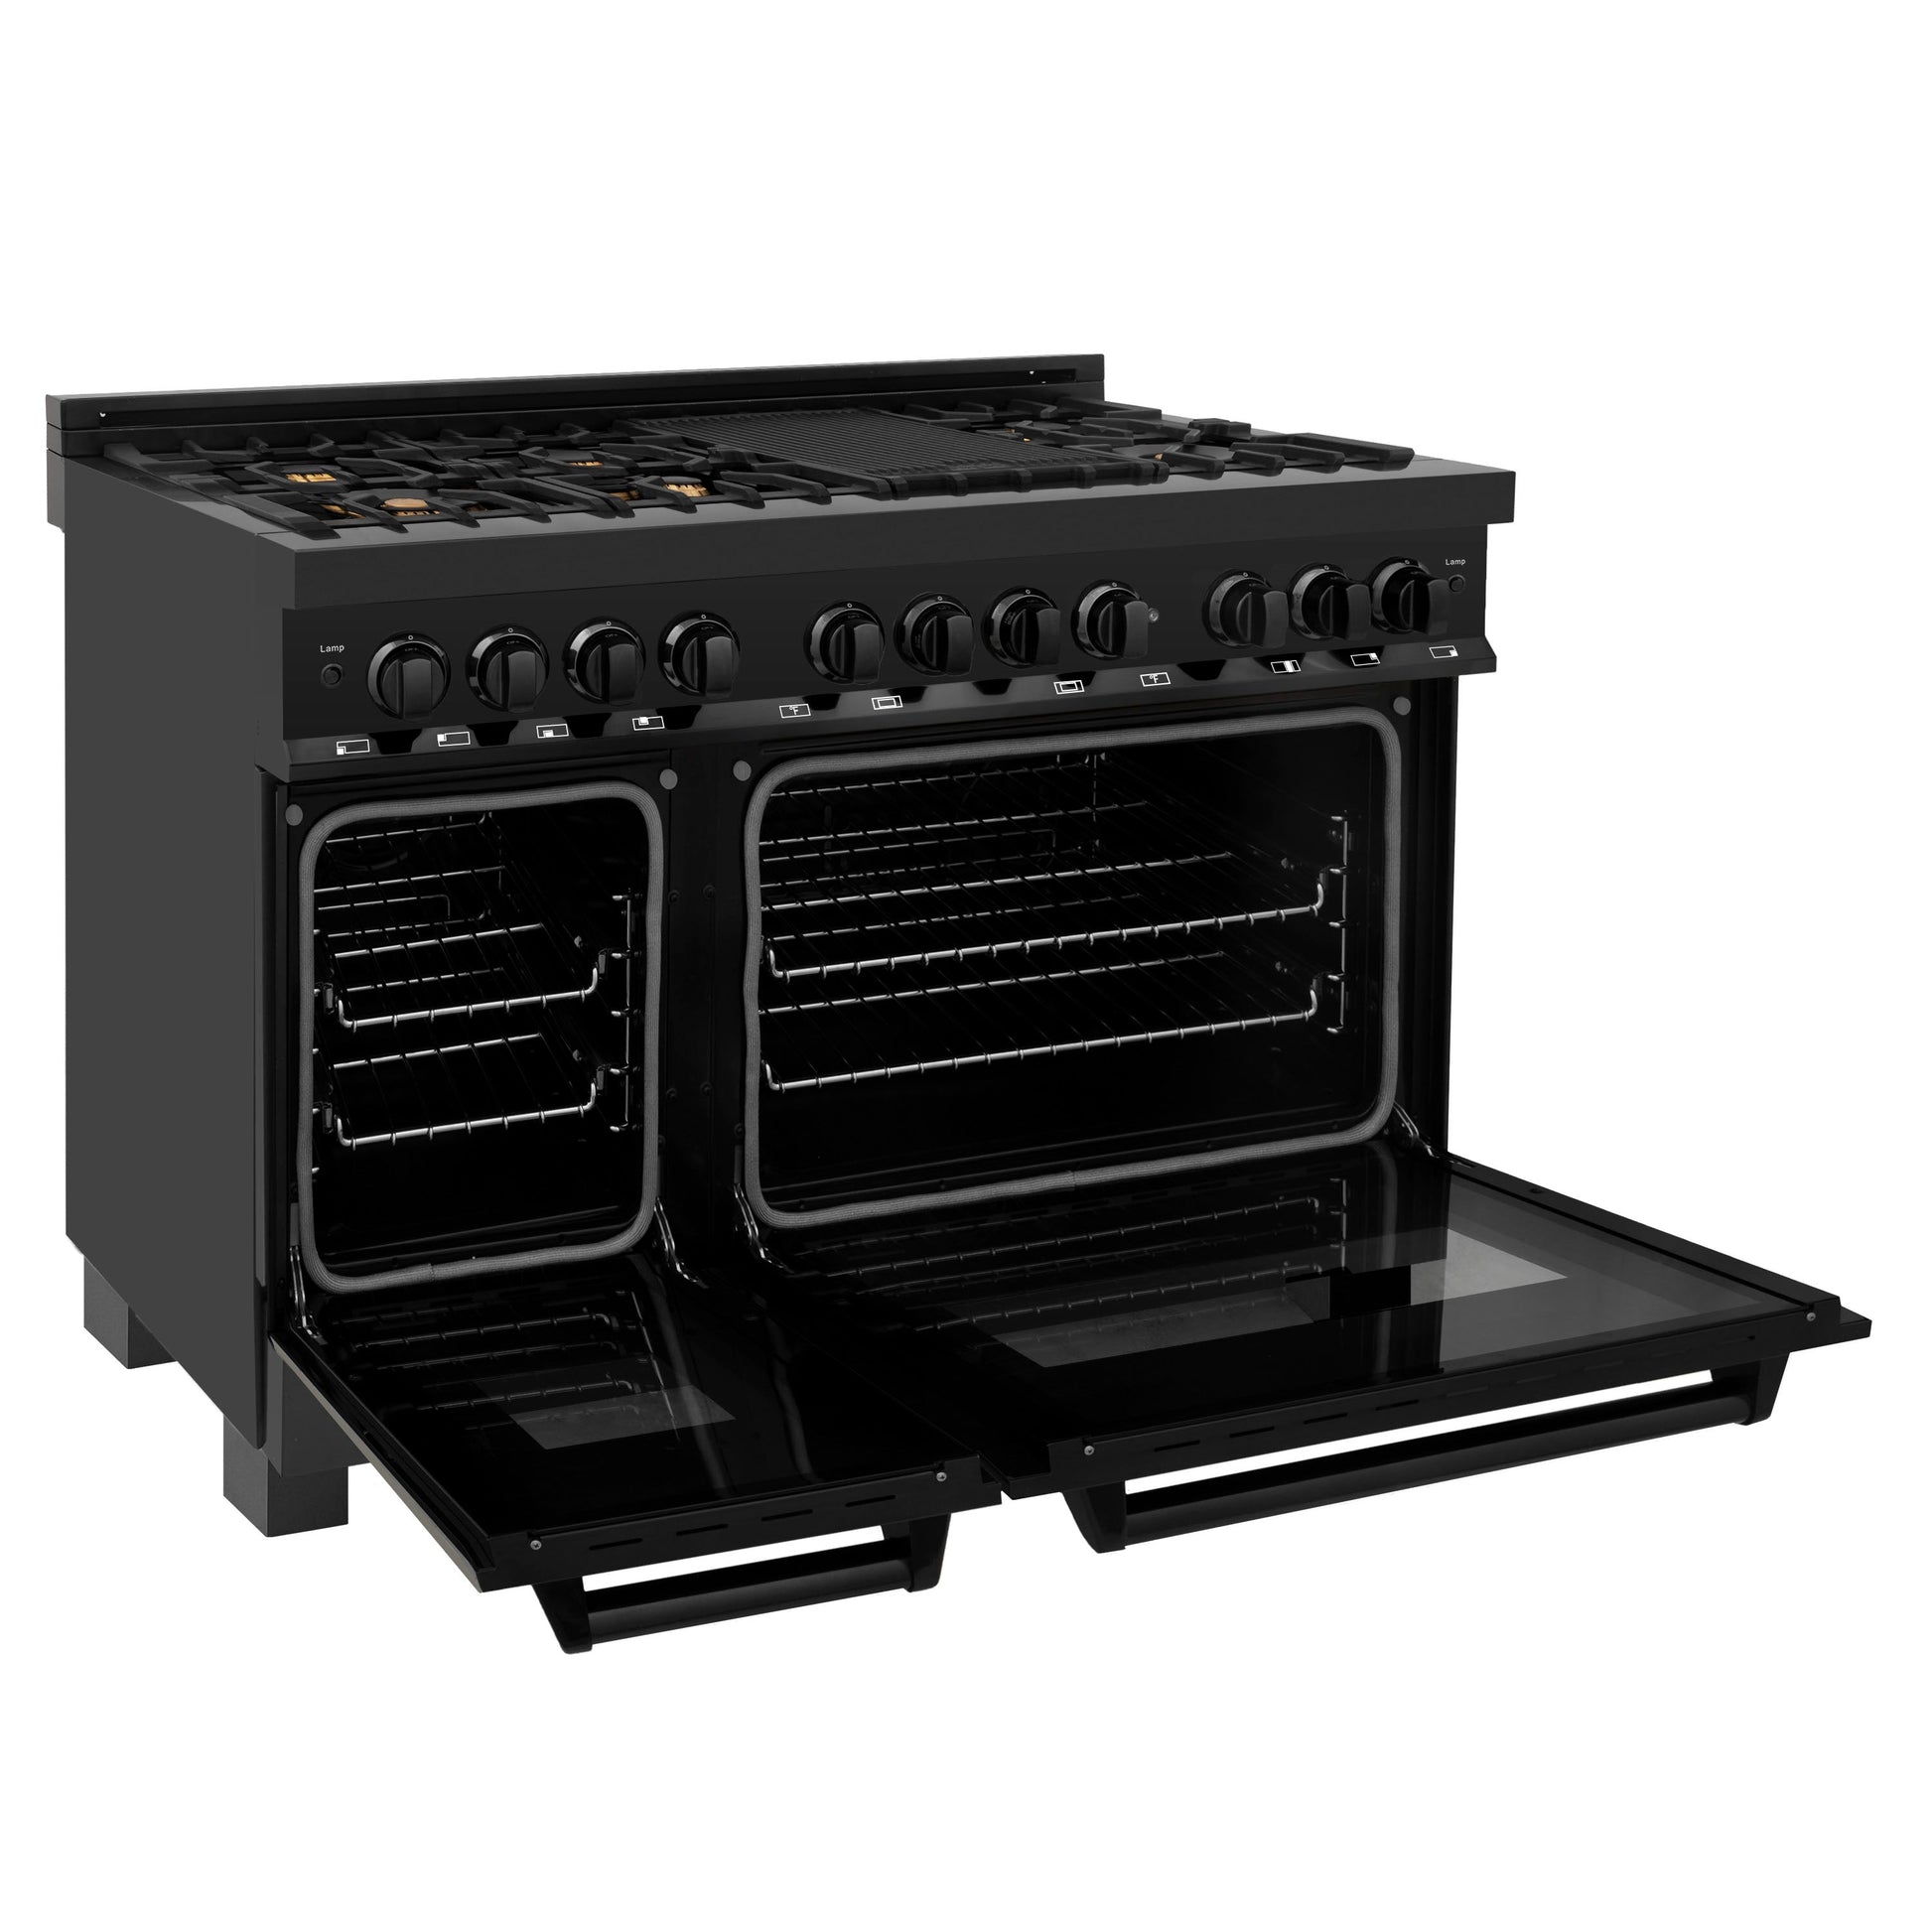 ZLINE 48" 6.0 cu. ft. Dual Fuel Range with Gas Stove and Electric Oven - Black Stainless Steel with Brass Burners